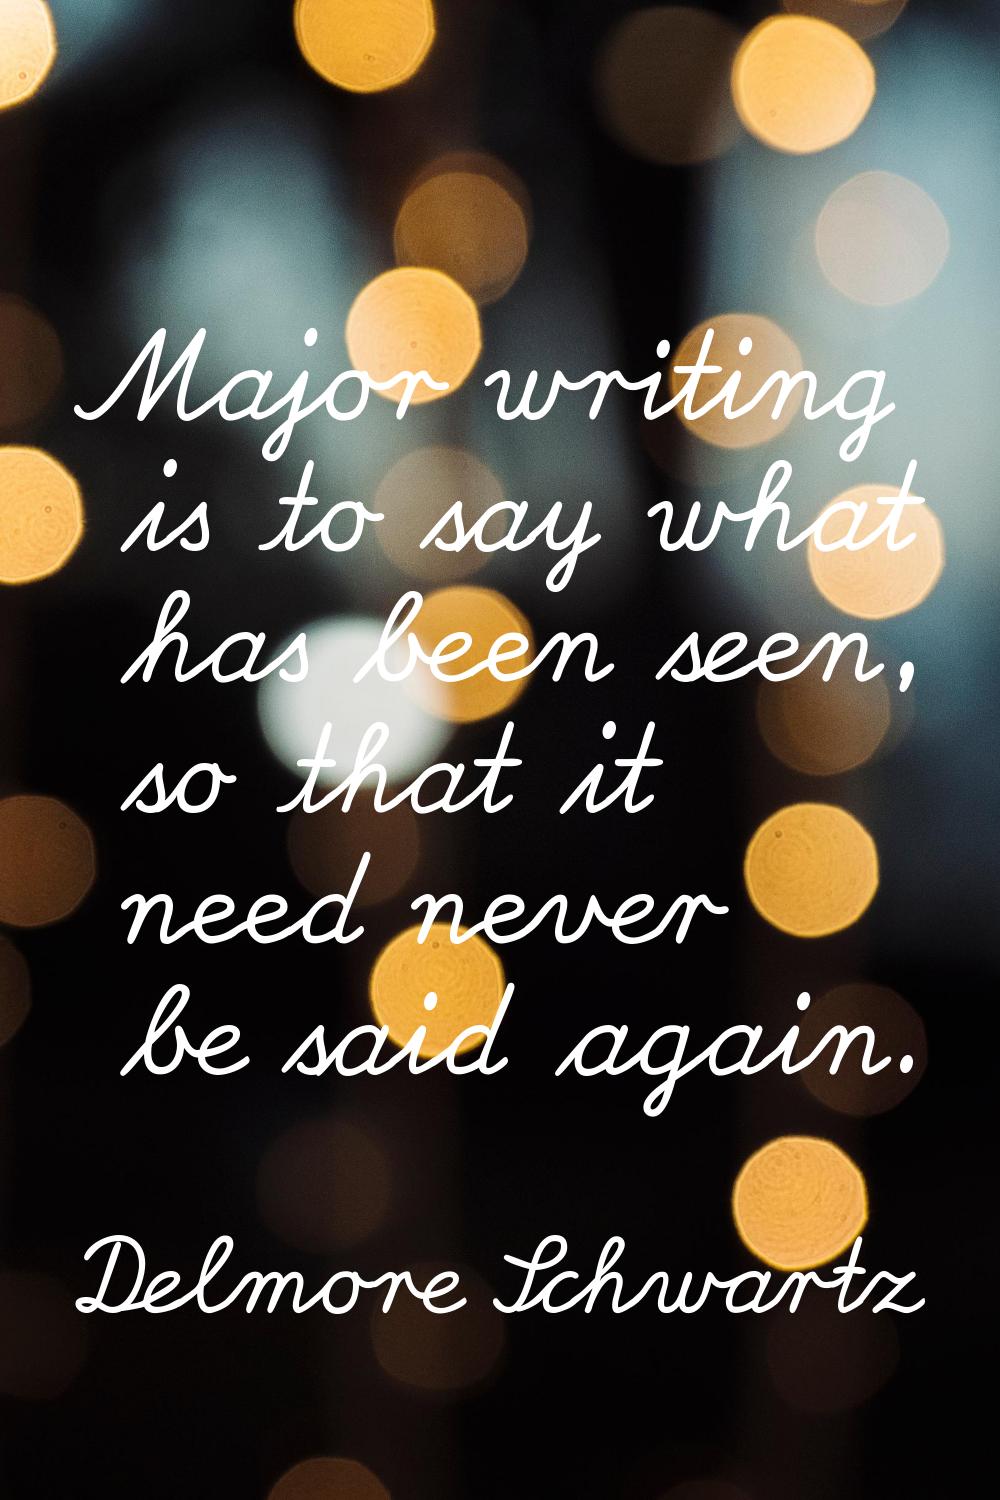 Major writing is to say what has been seen, so that it need never be said again.